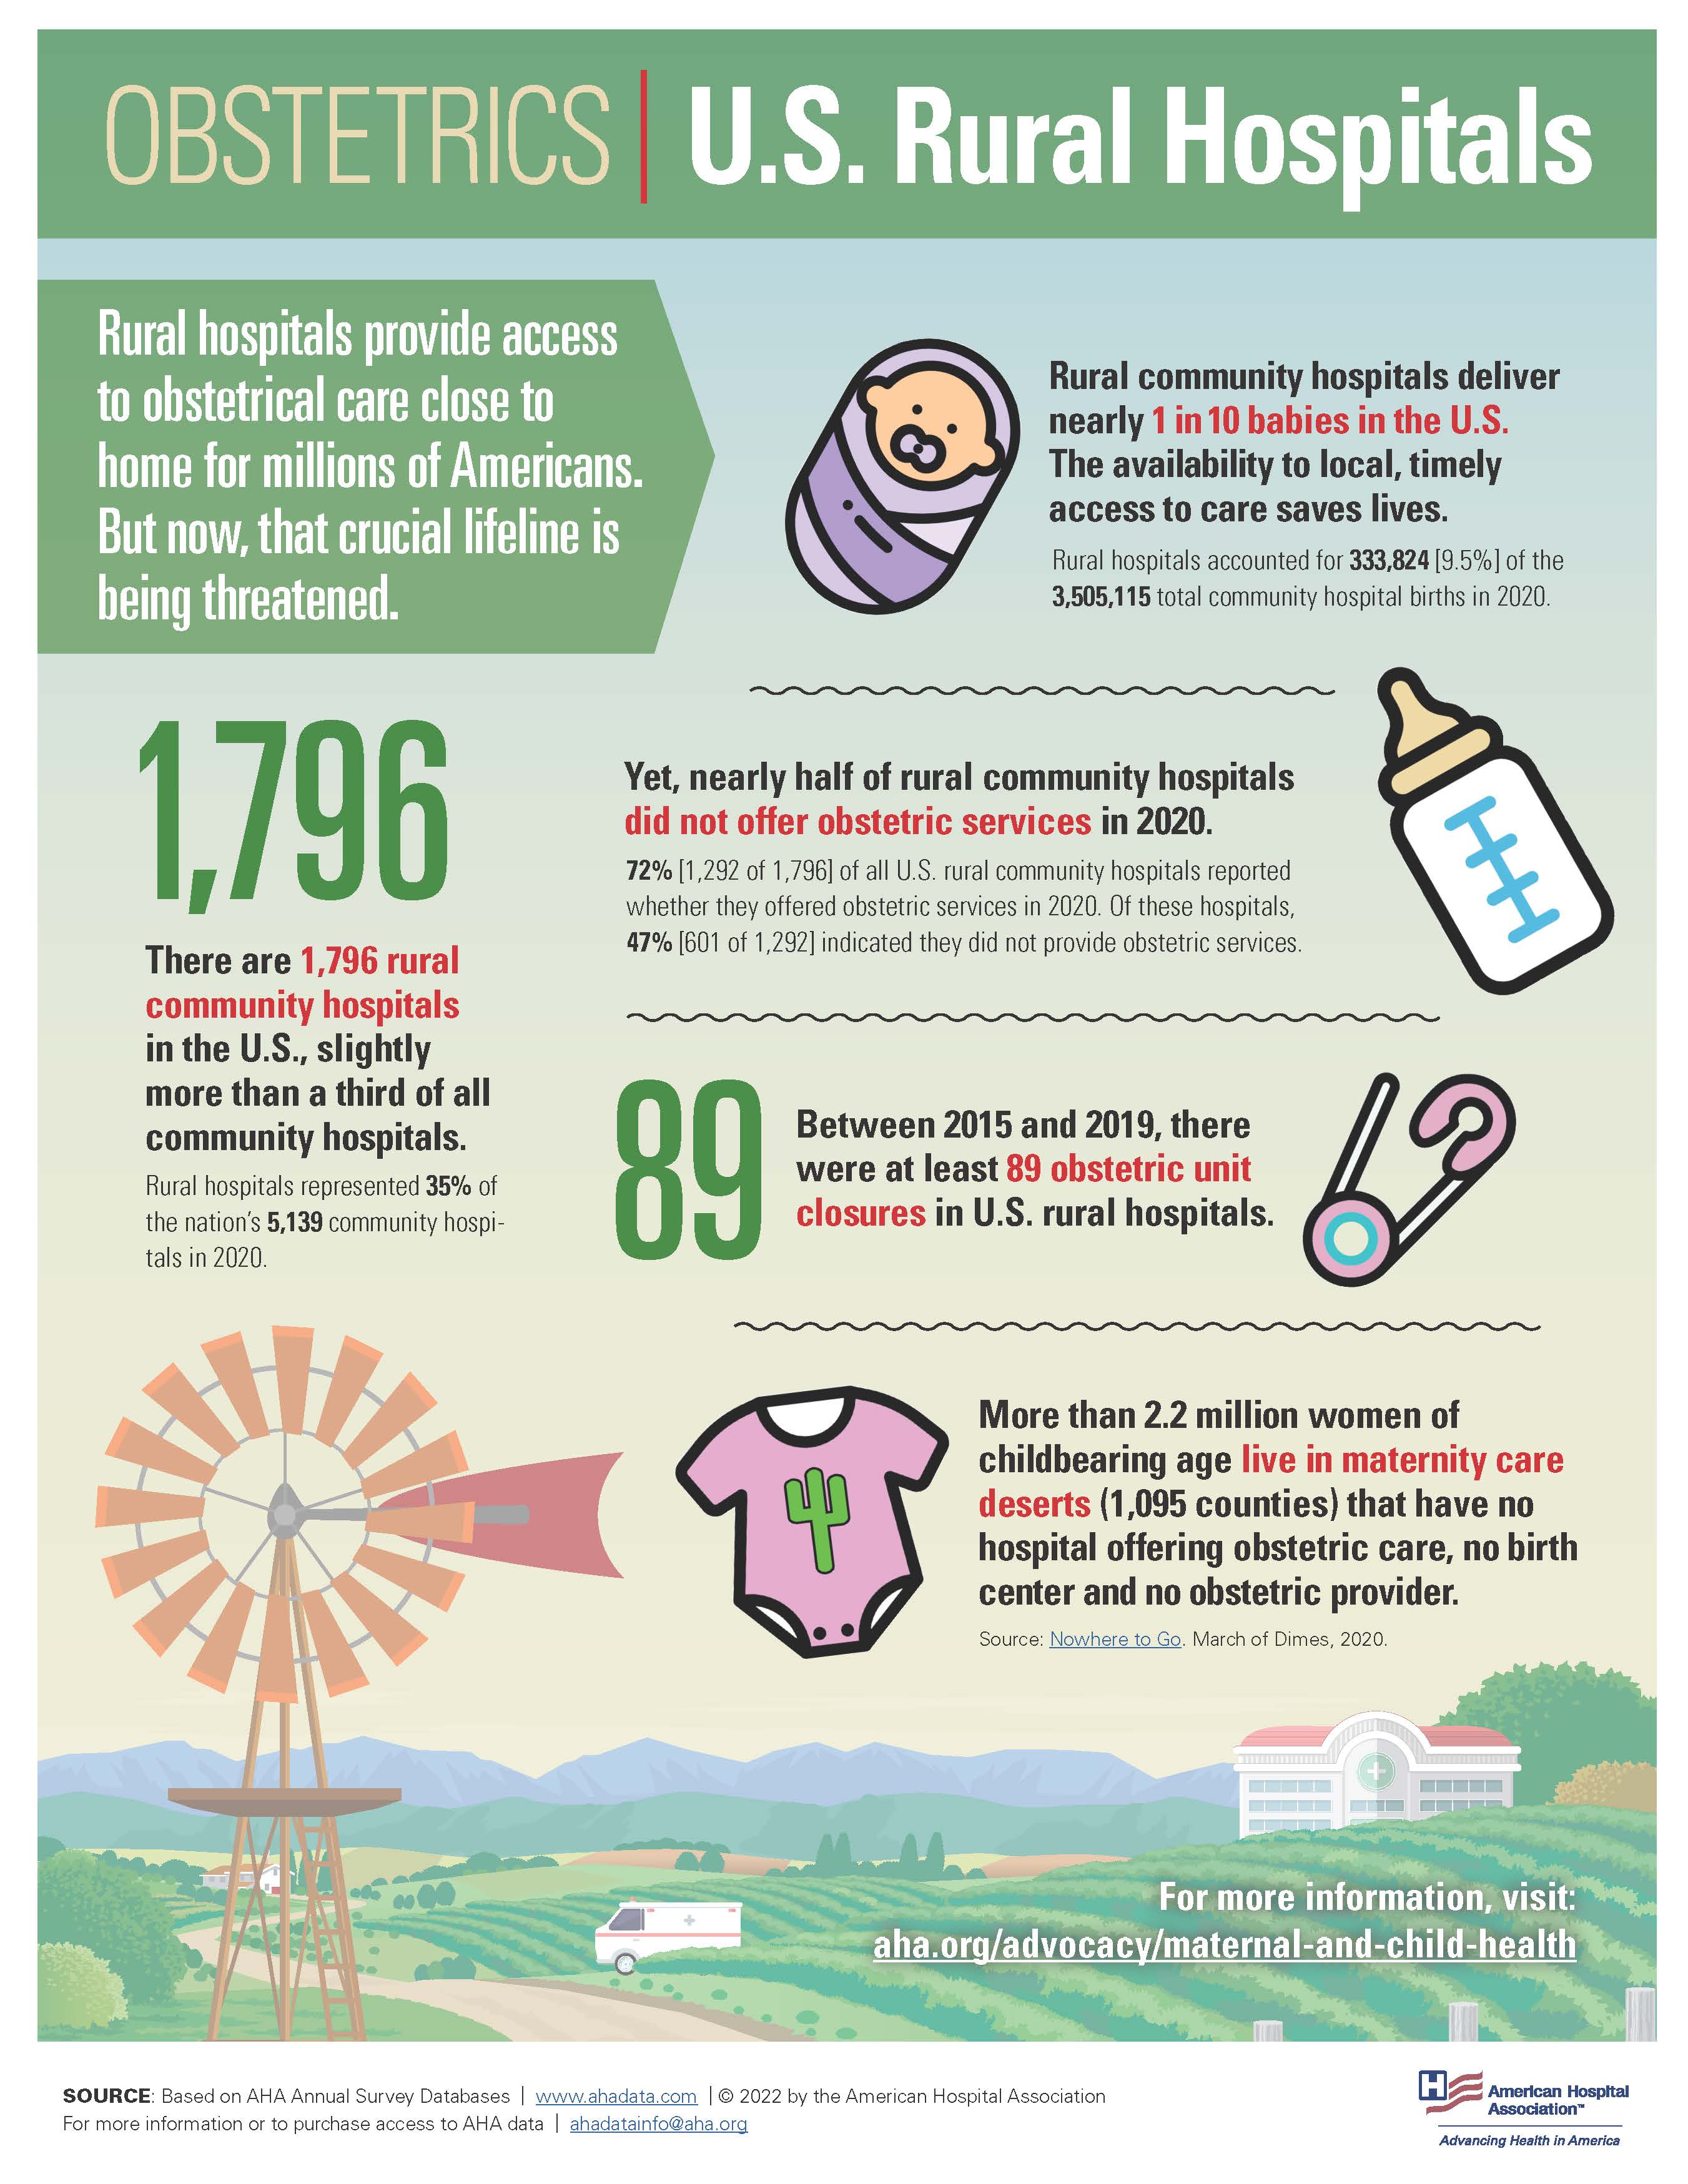 U.S. Rural Hospitals: Obstetrics Infographic. Rural hospitals provide access to obstetrical care close to home for millions of Americans. But now, that crucial lifeline is being threatened.